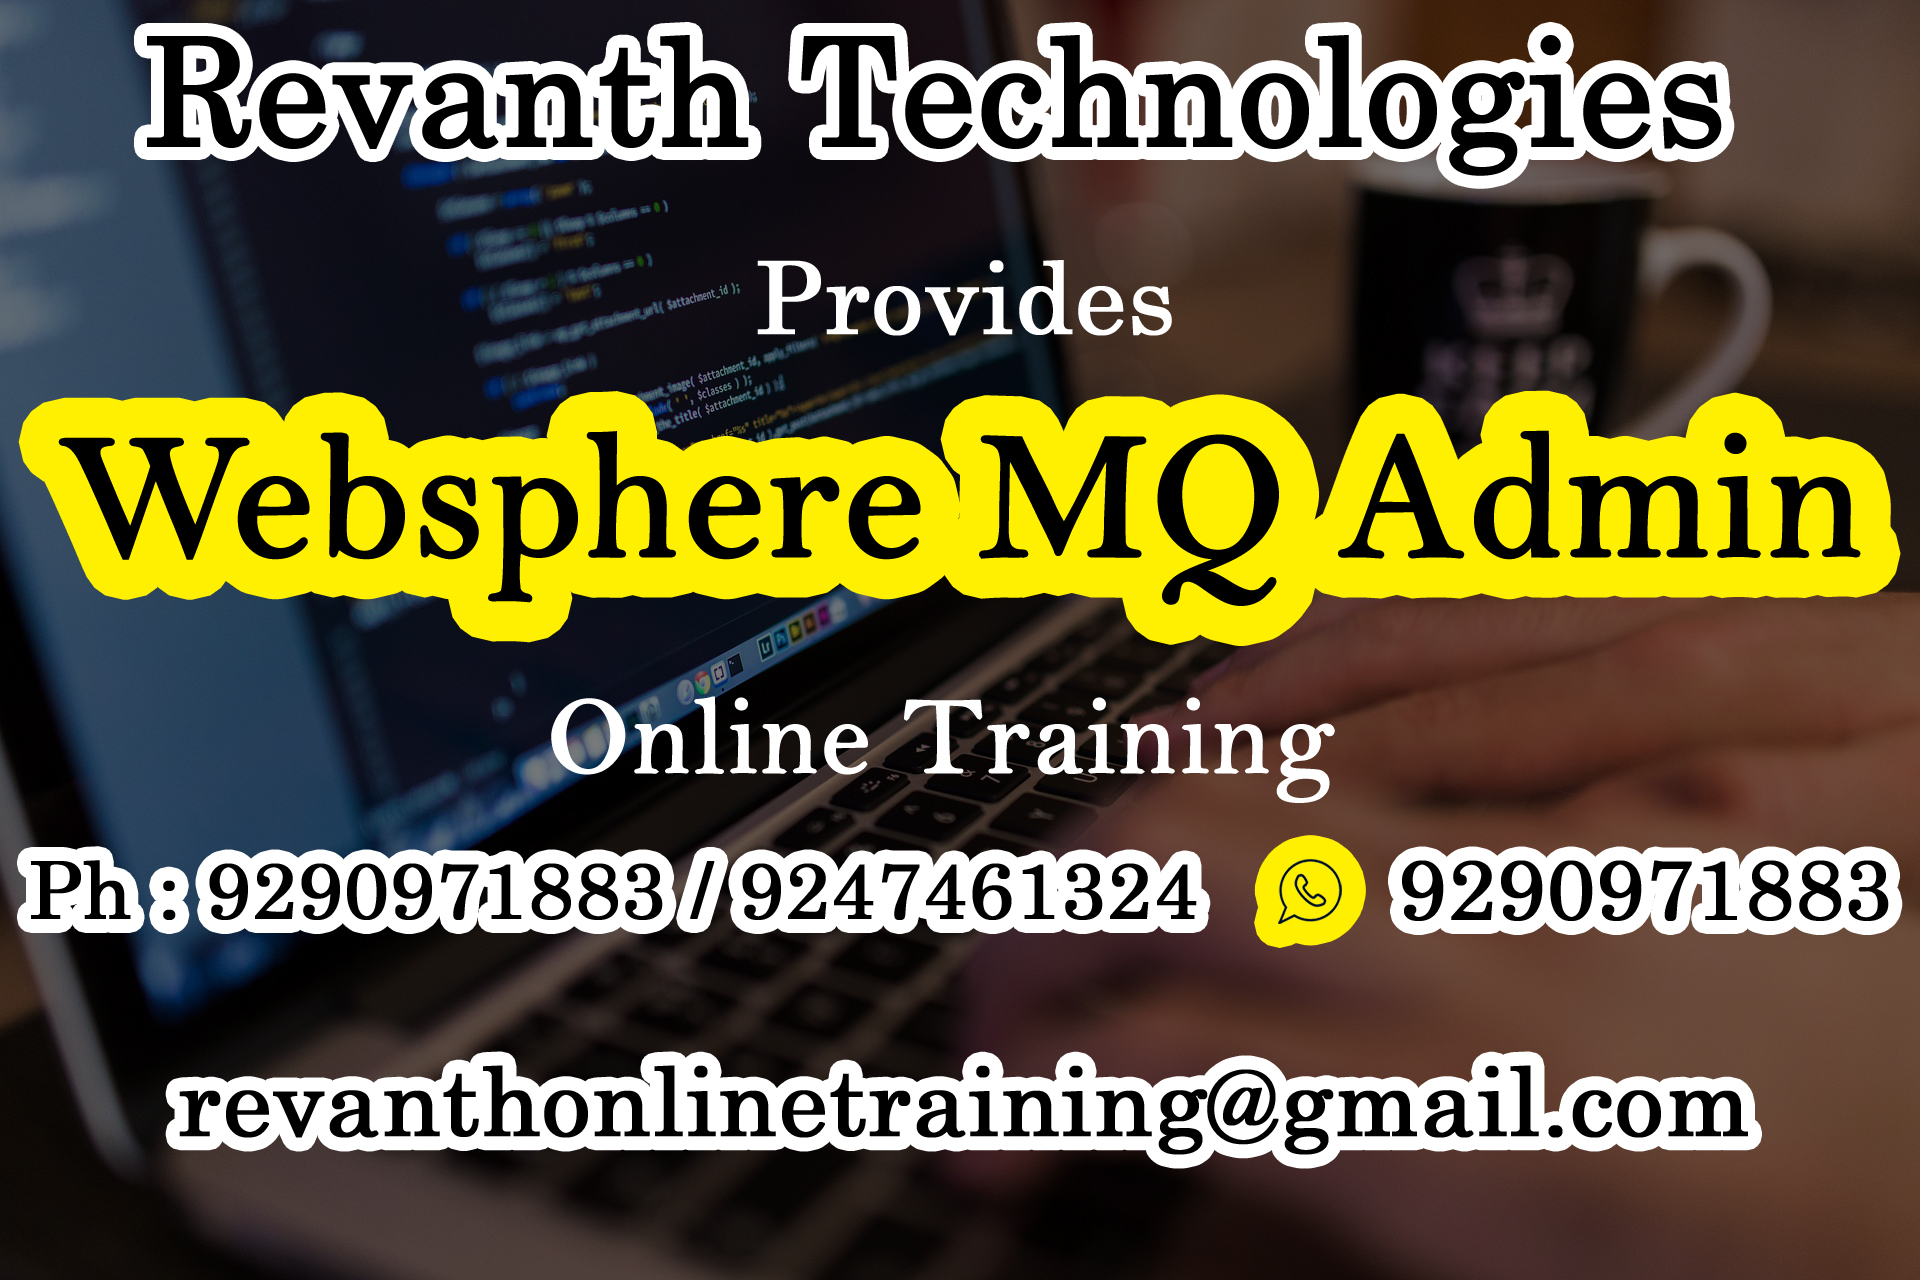 Websphere MQ Admin Online Training from India